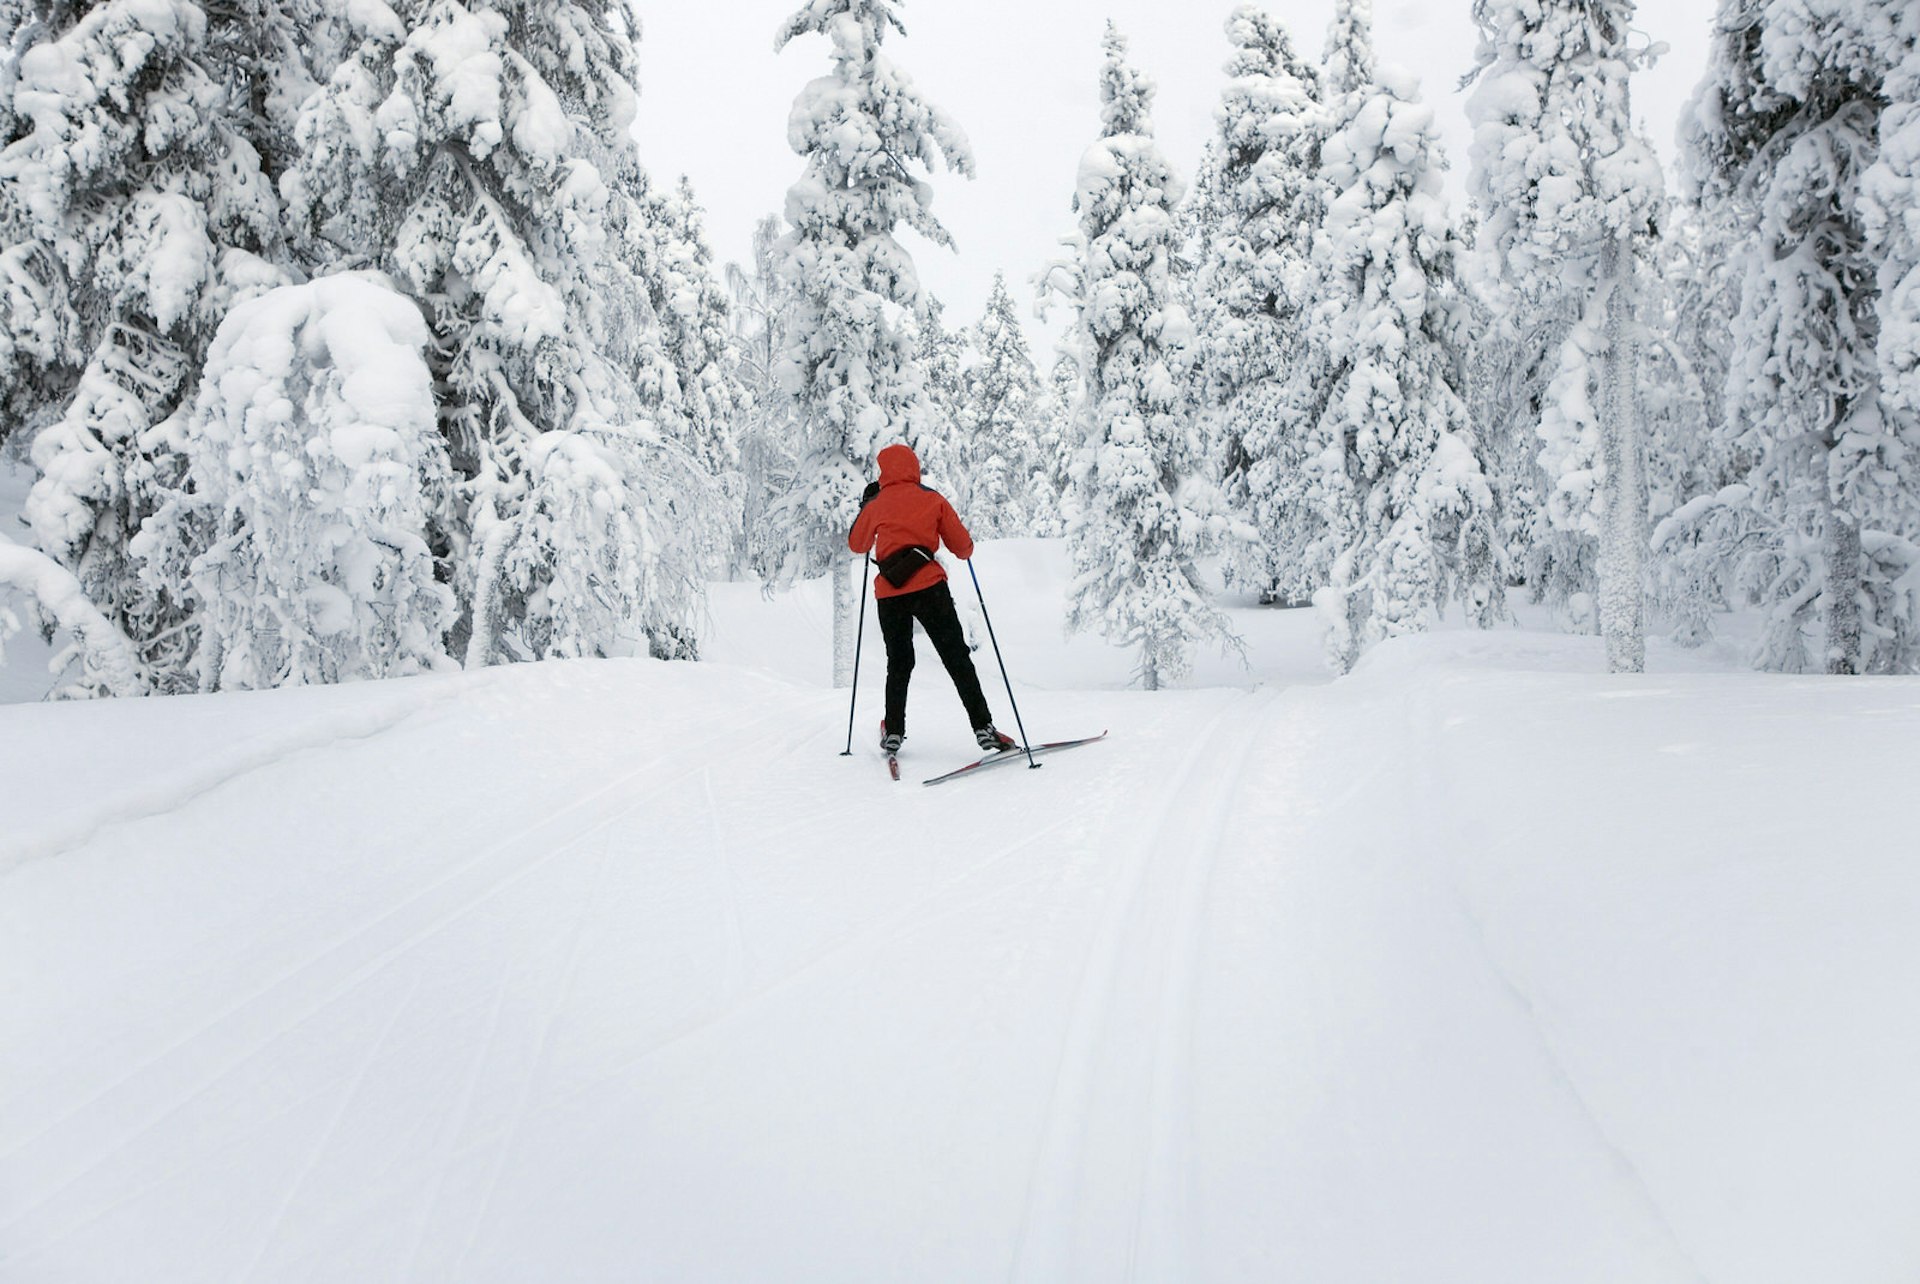 A cross-country skier skiing on one of the forested trails in the Saariselkä region.